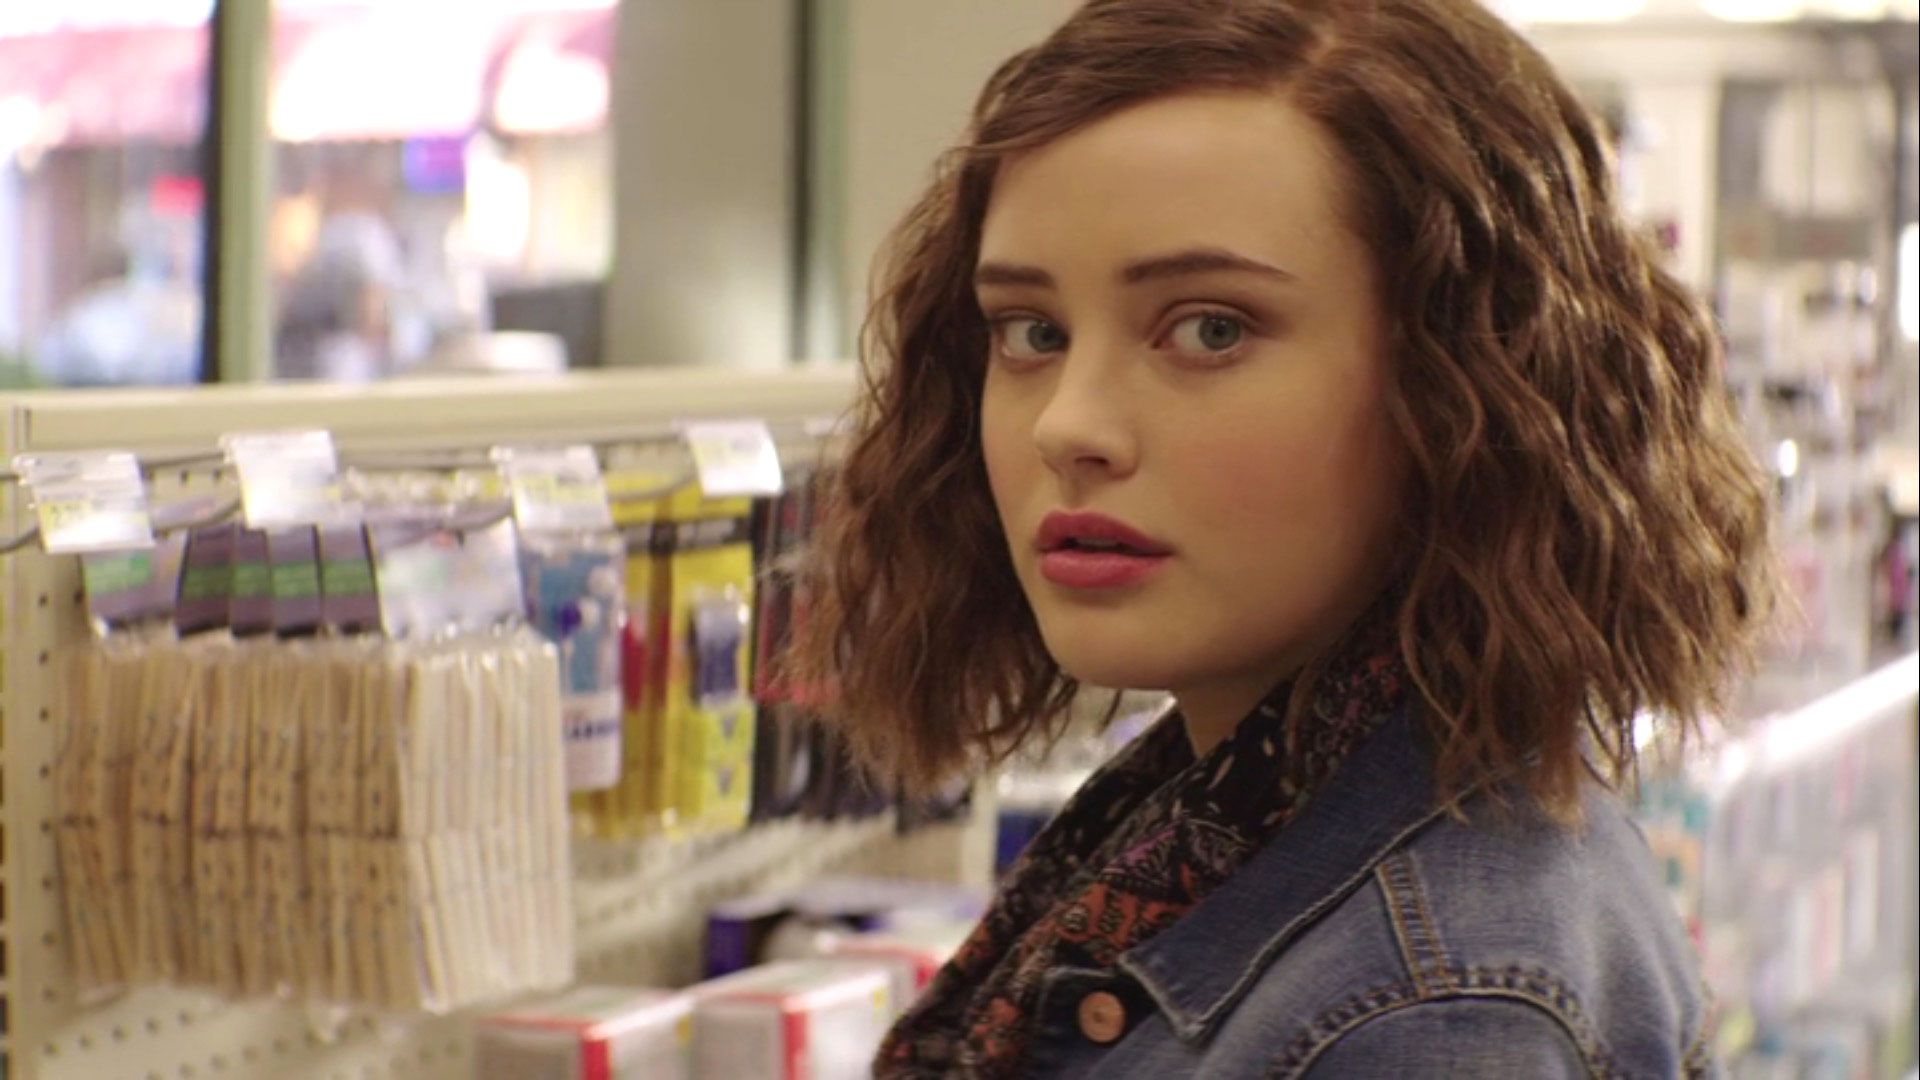 13 Reasons Why star Katherine Langford defends controversial suicide scene  Its not a beautiful tragedy